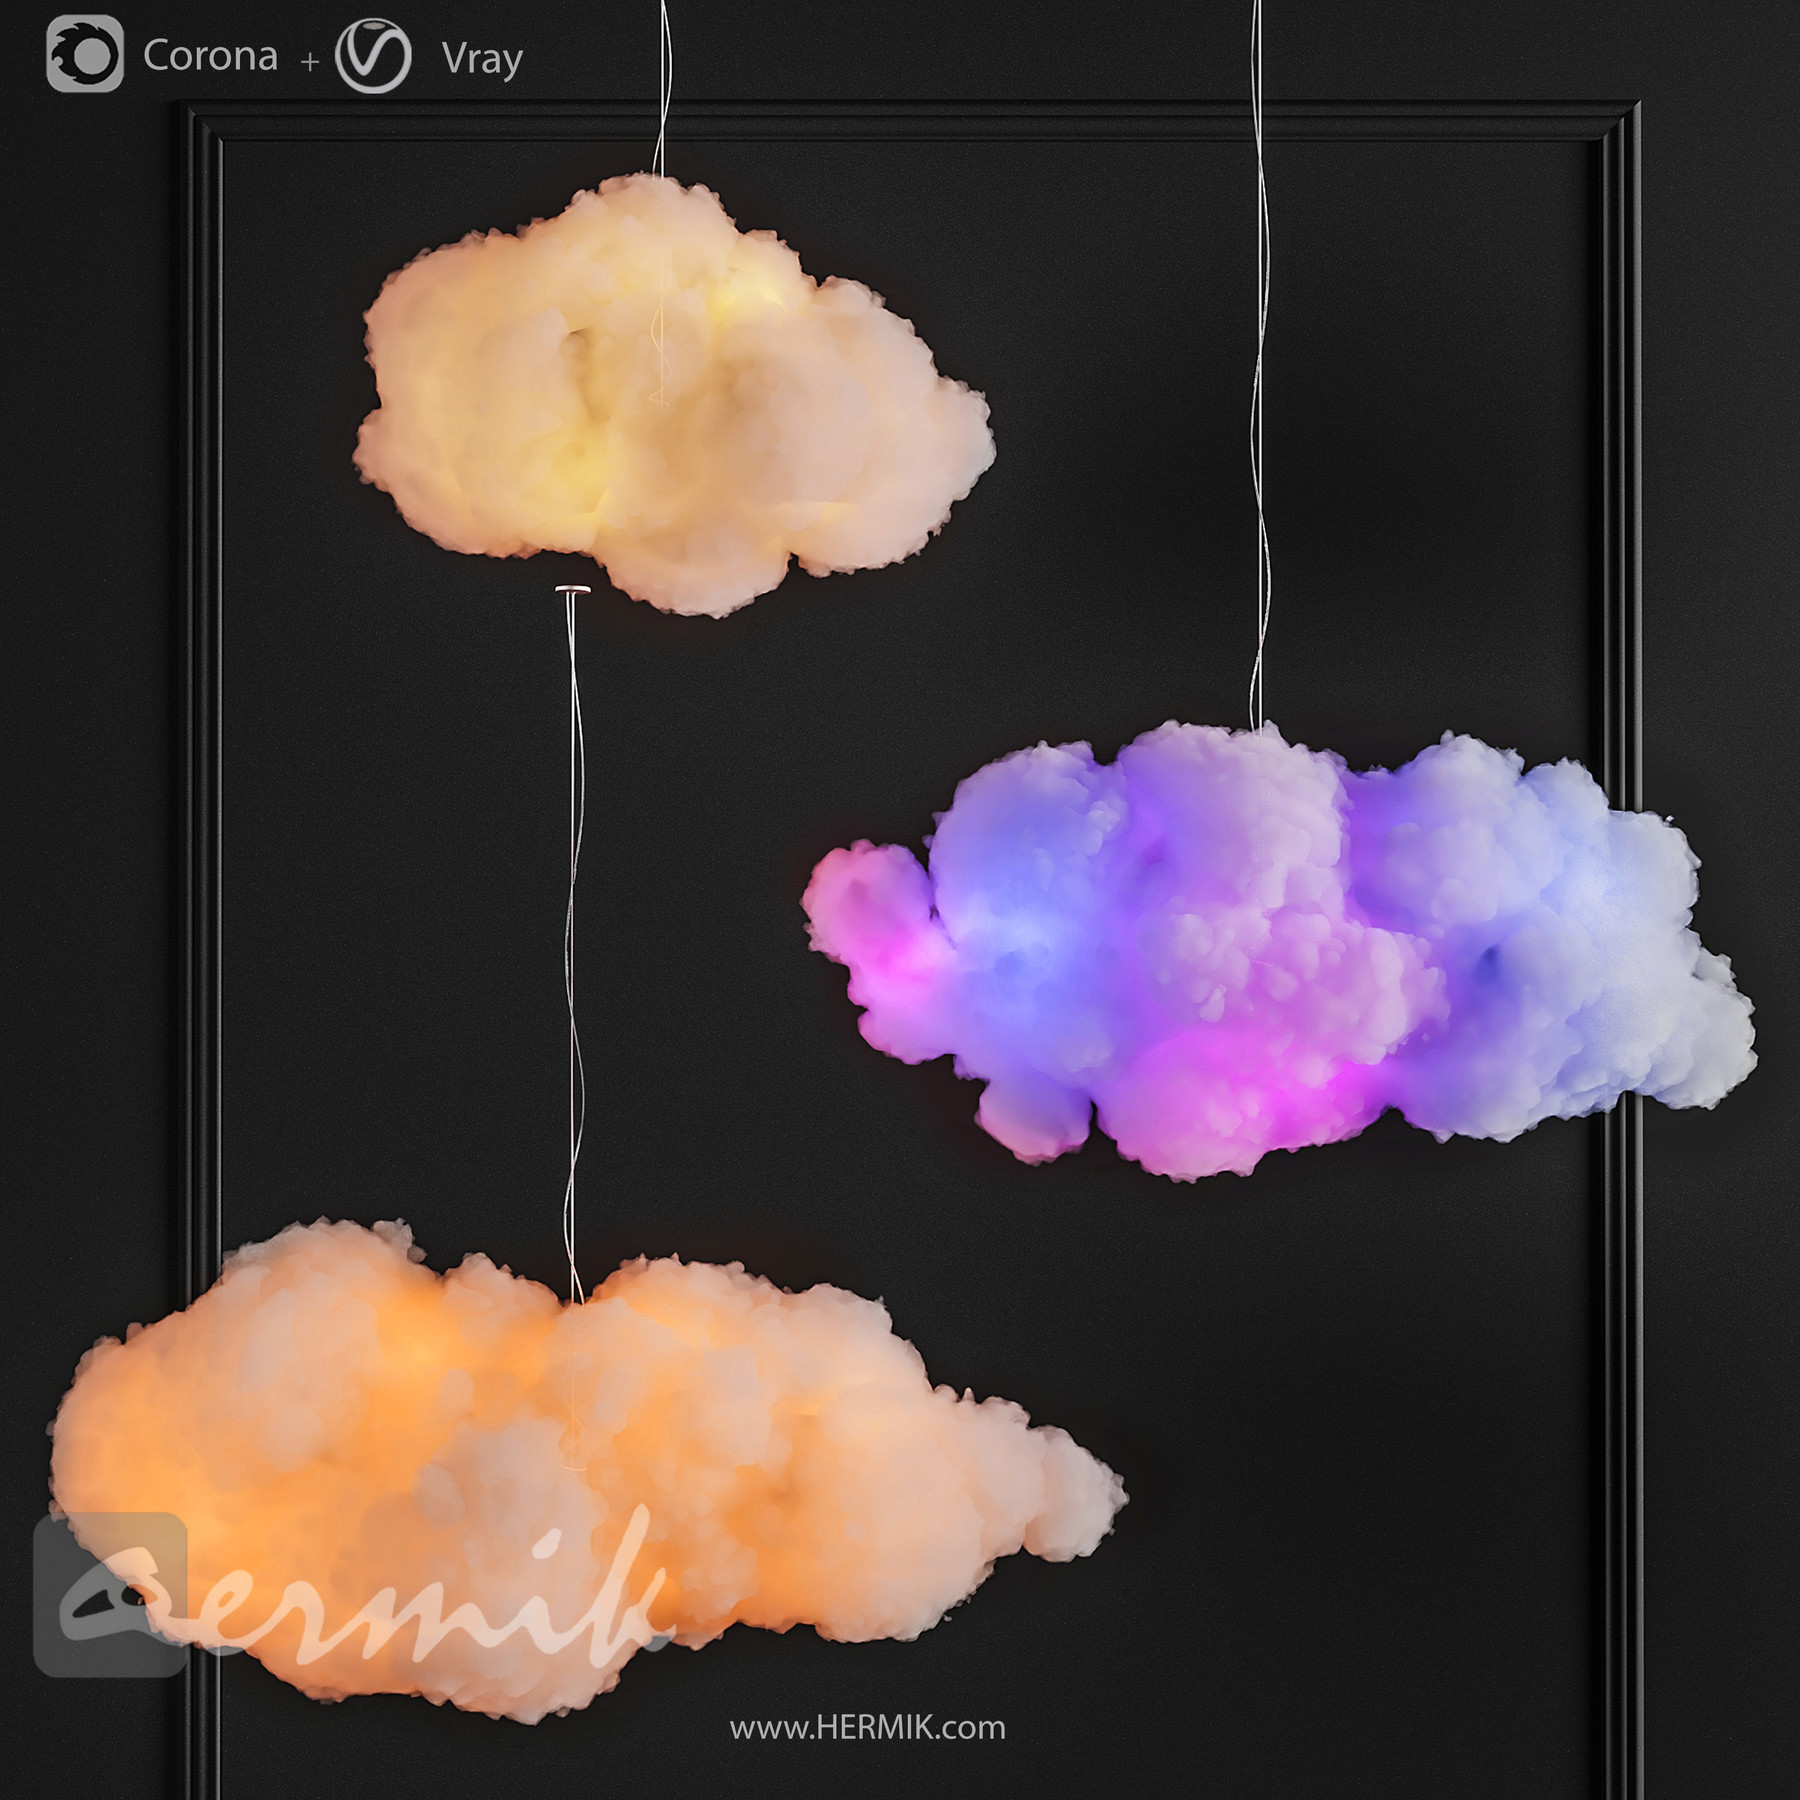 Simulated Cotton Clouds Living Room Bedroom Bedside Ceiling - Temu